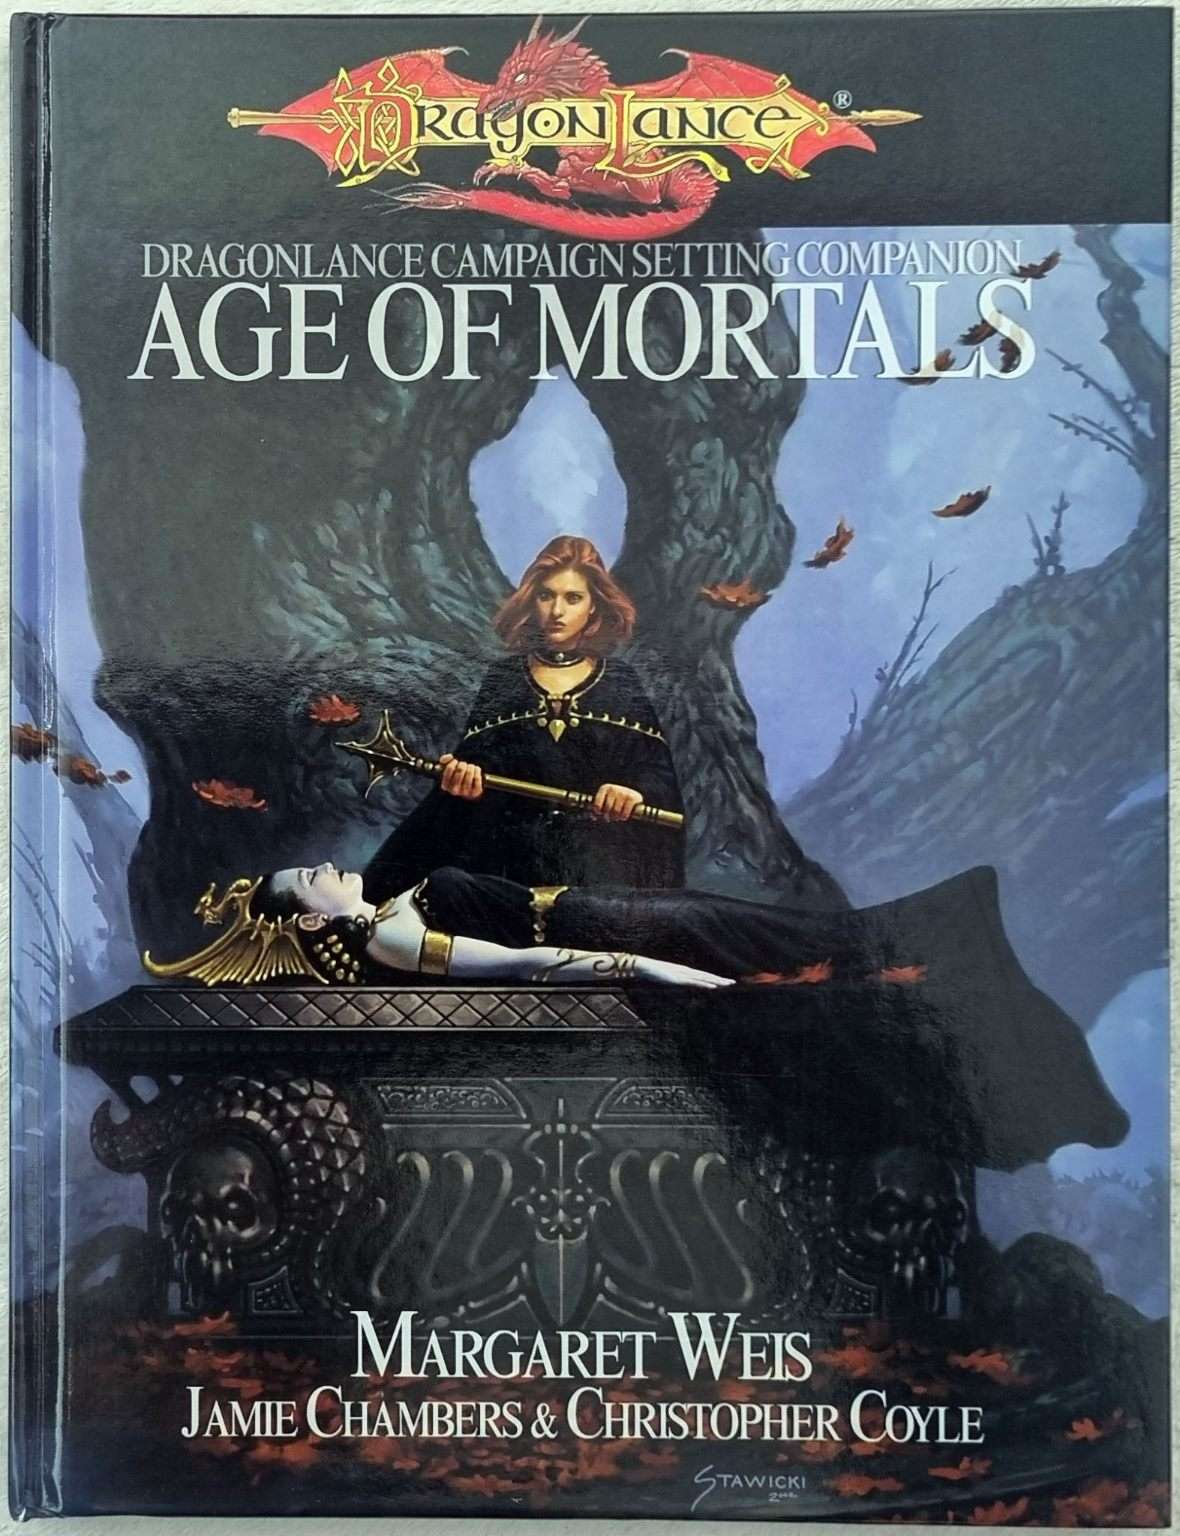 Dungeons and Dragons - Dragonlance Campaign Setting: Age of Mortals 3.5e